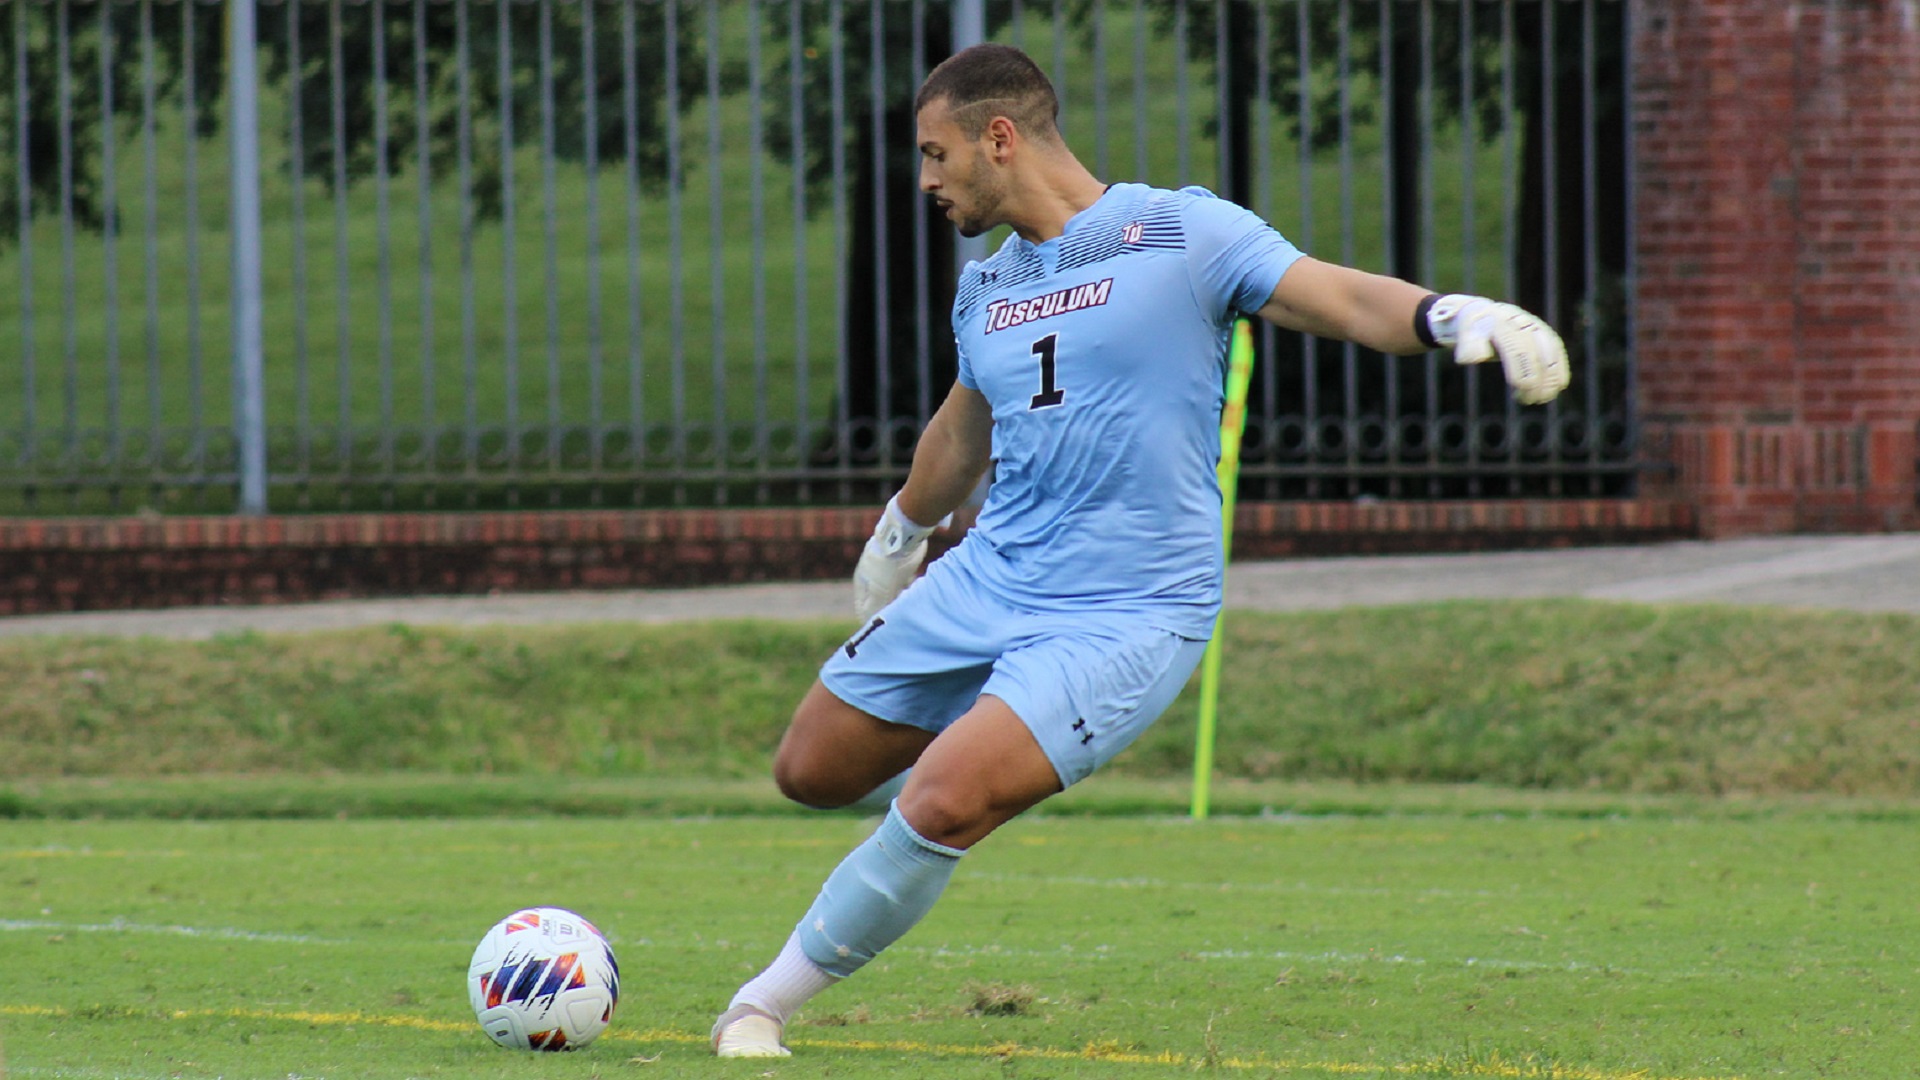 Late PK leaves Pioneers with 3-3 draw at Clayton State